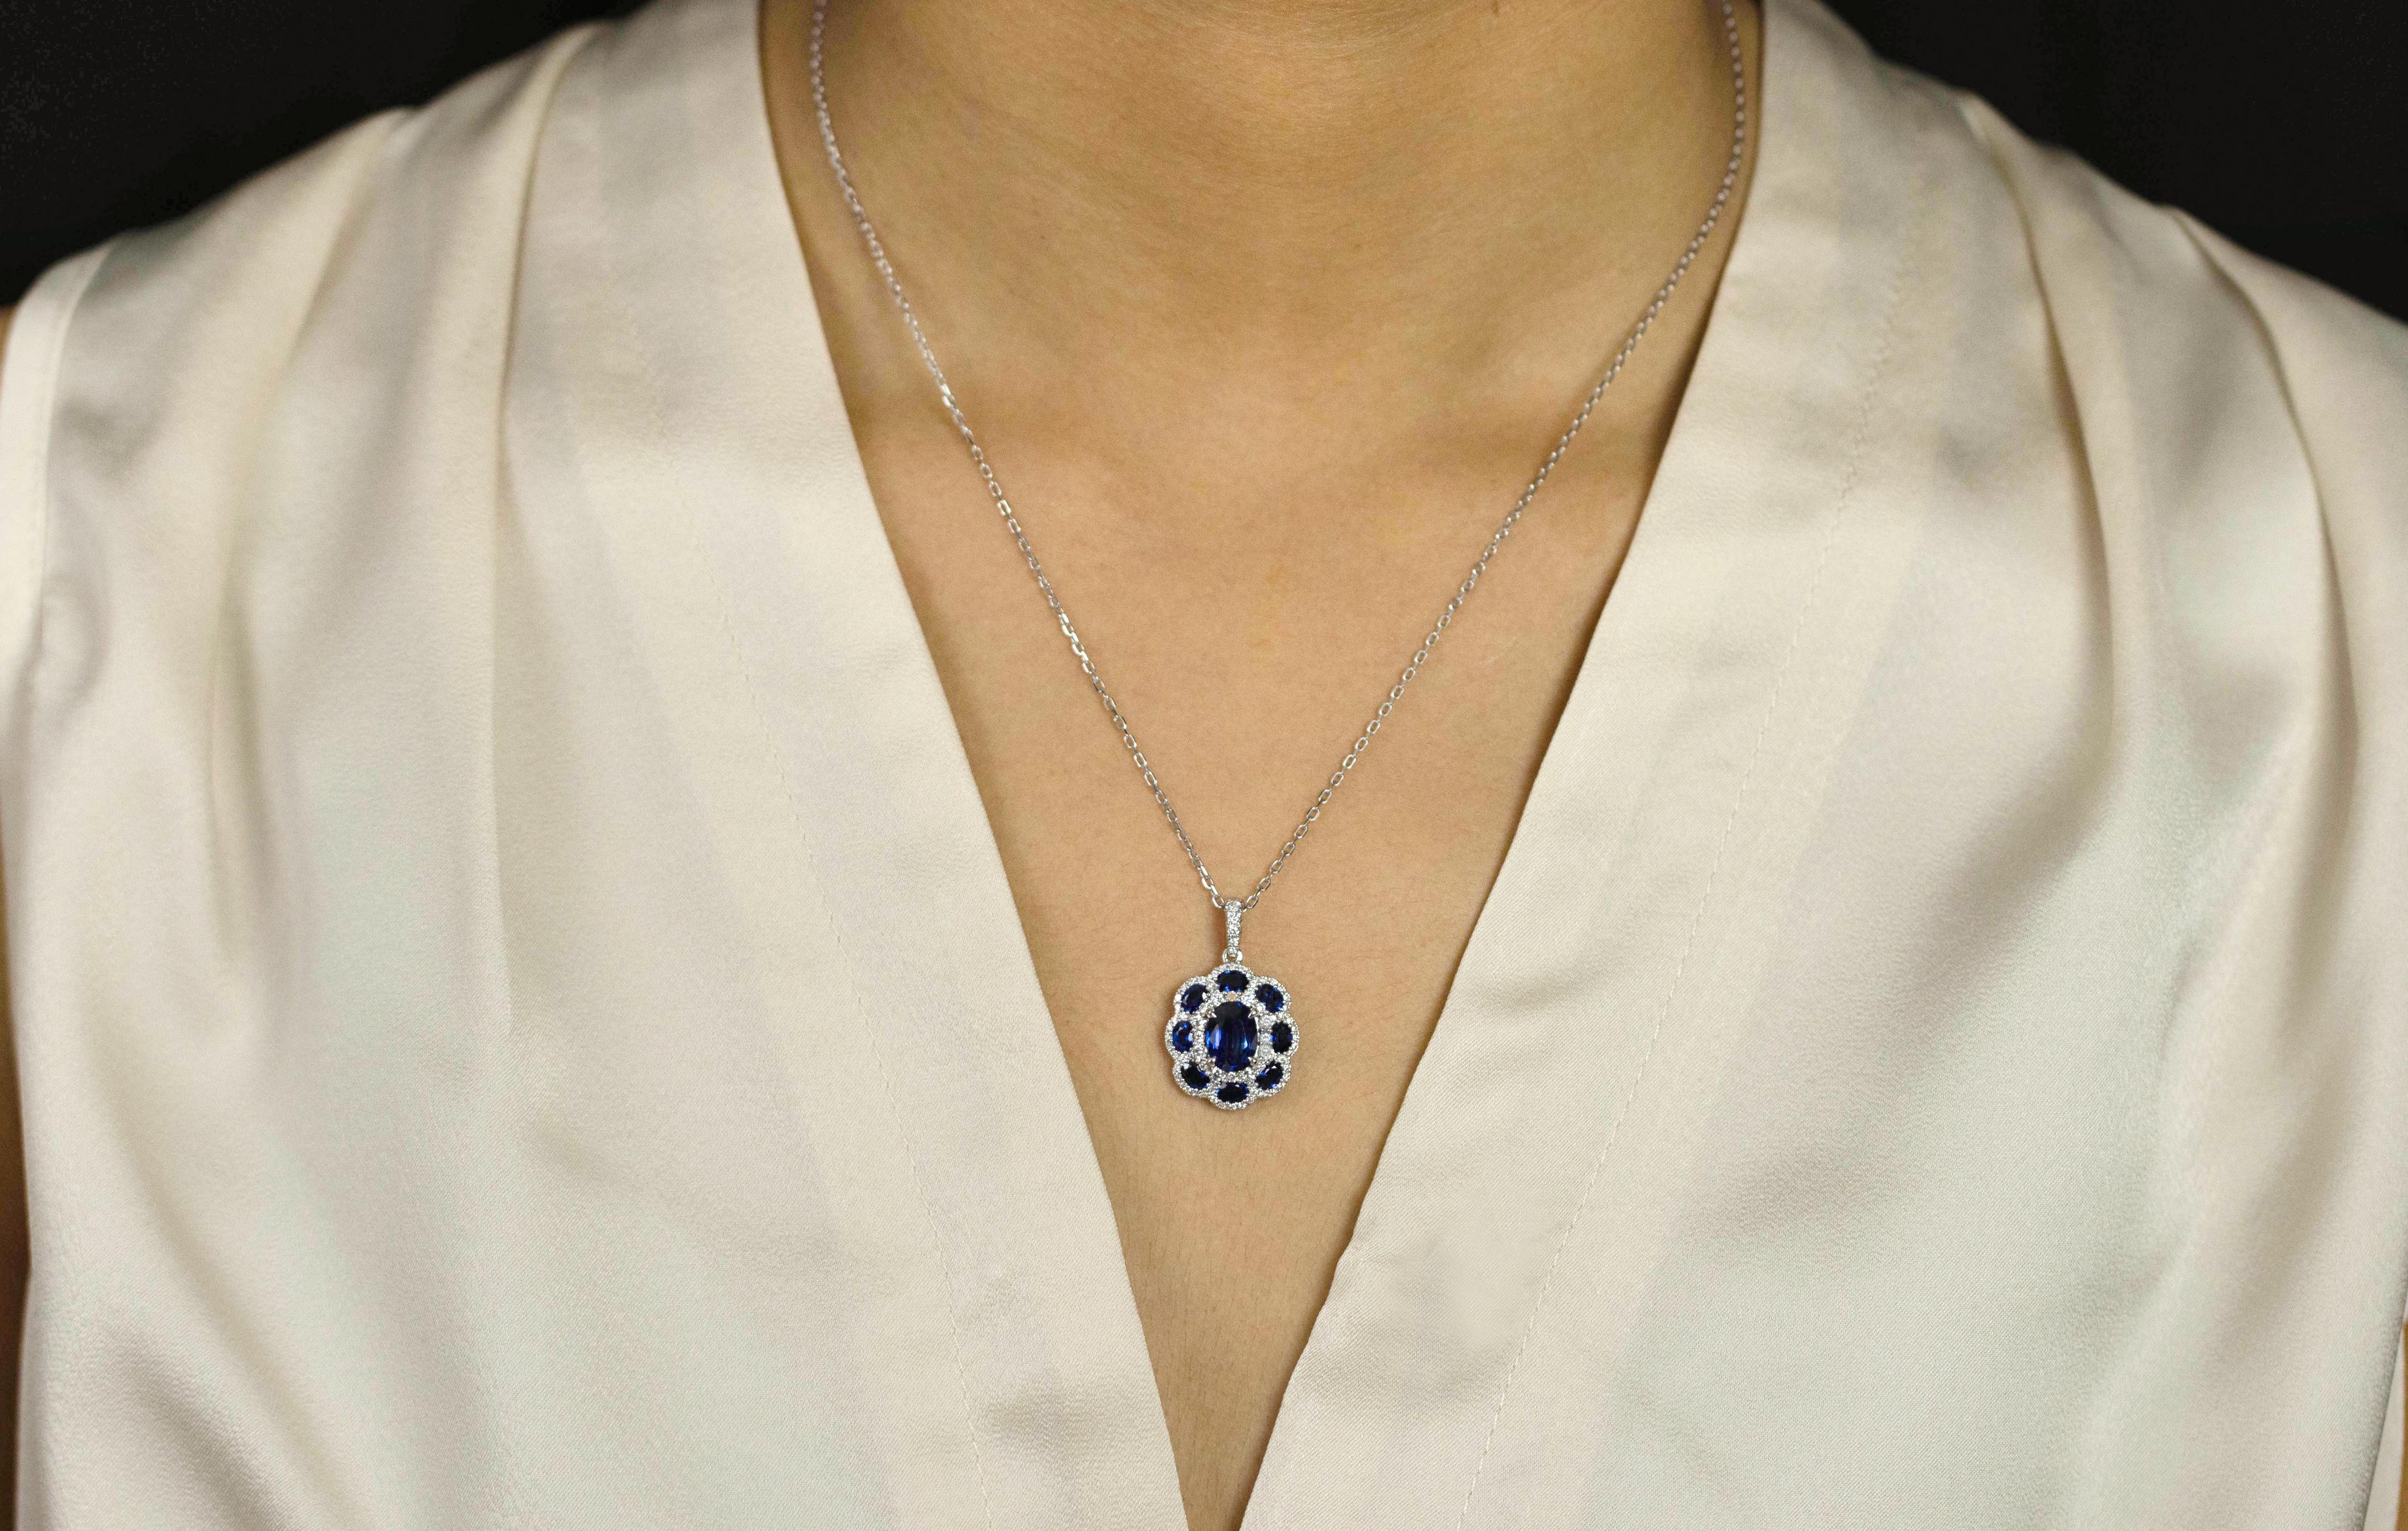 Roman Malakov 3.88 Carats Oval Cut Blue Sapphire and Diamond Pendant Necklace In New Condition For Sale In New York, NY